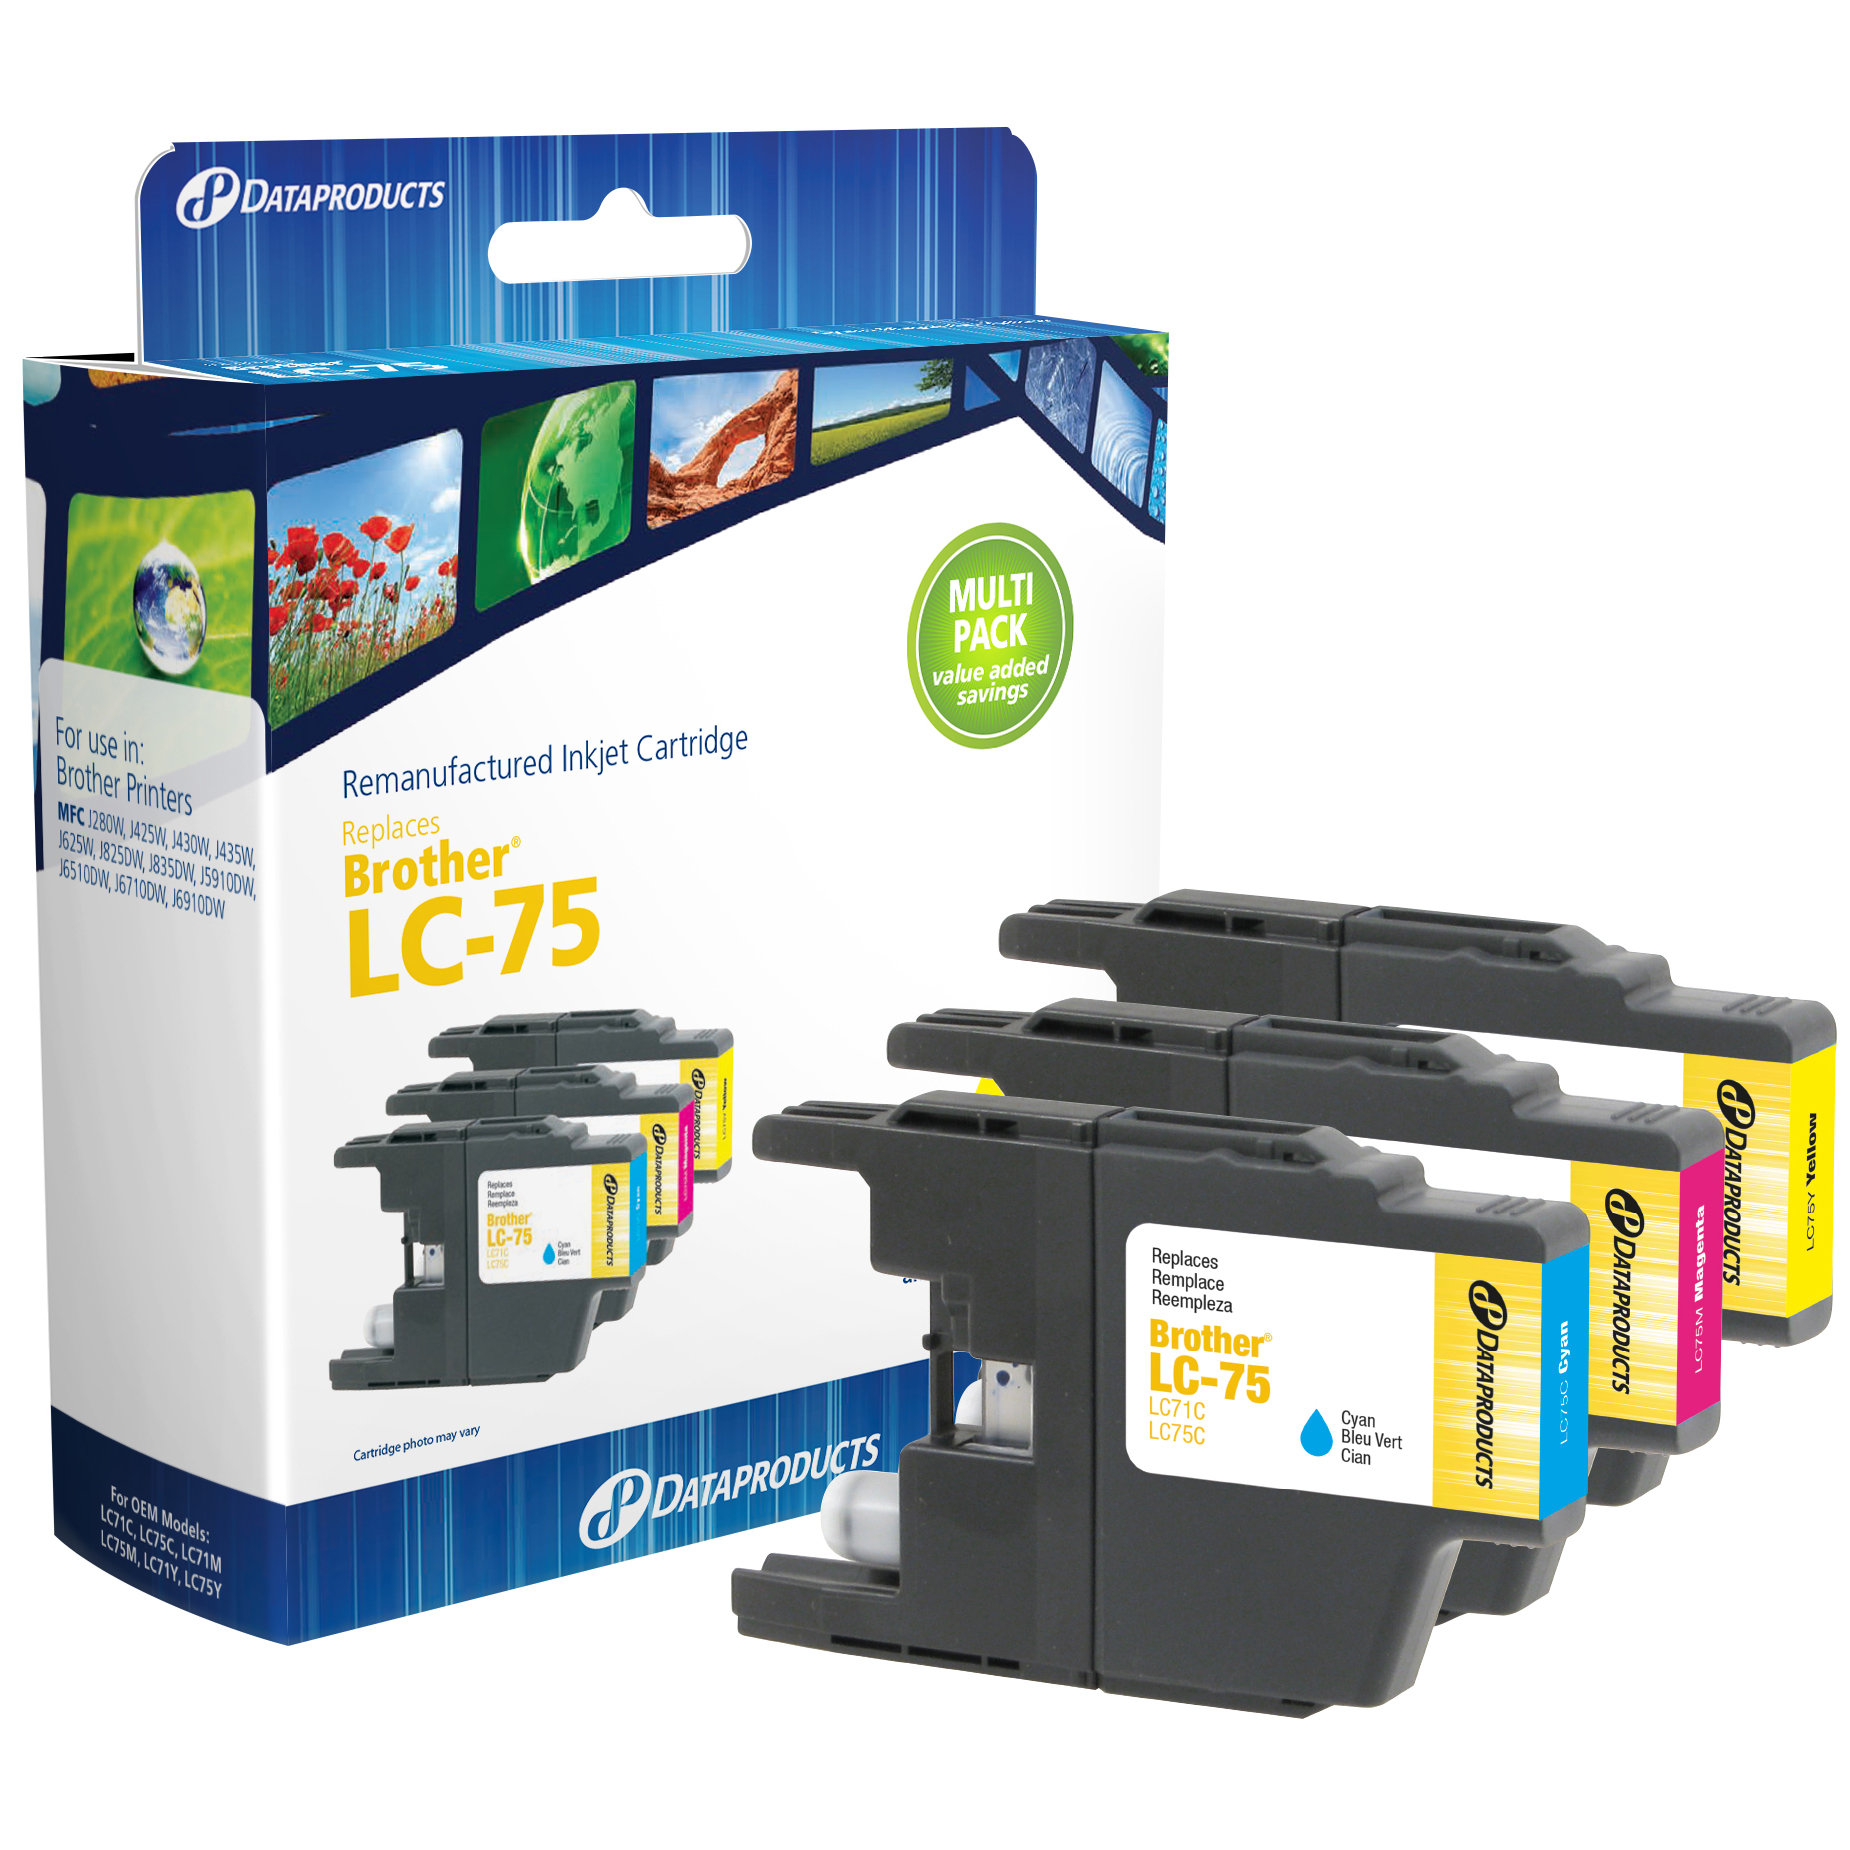 Dataproducts DPCLC75CMY Remanufactured Inkjet Cartridge for Brother LC75 - High Yield CMY Color Ink 3-Pack